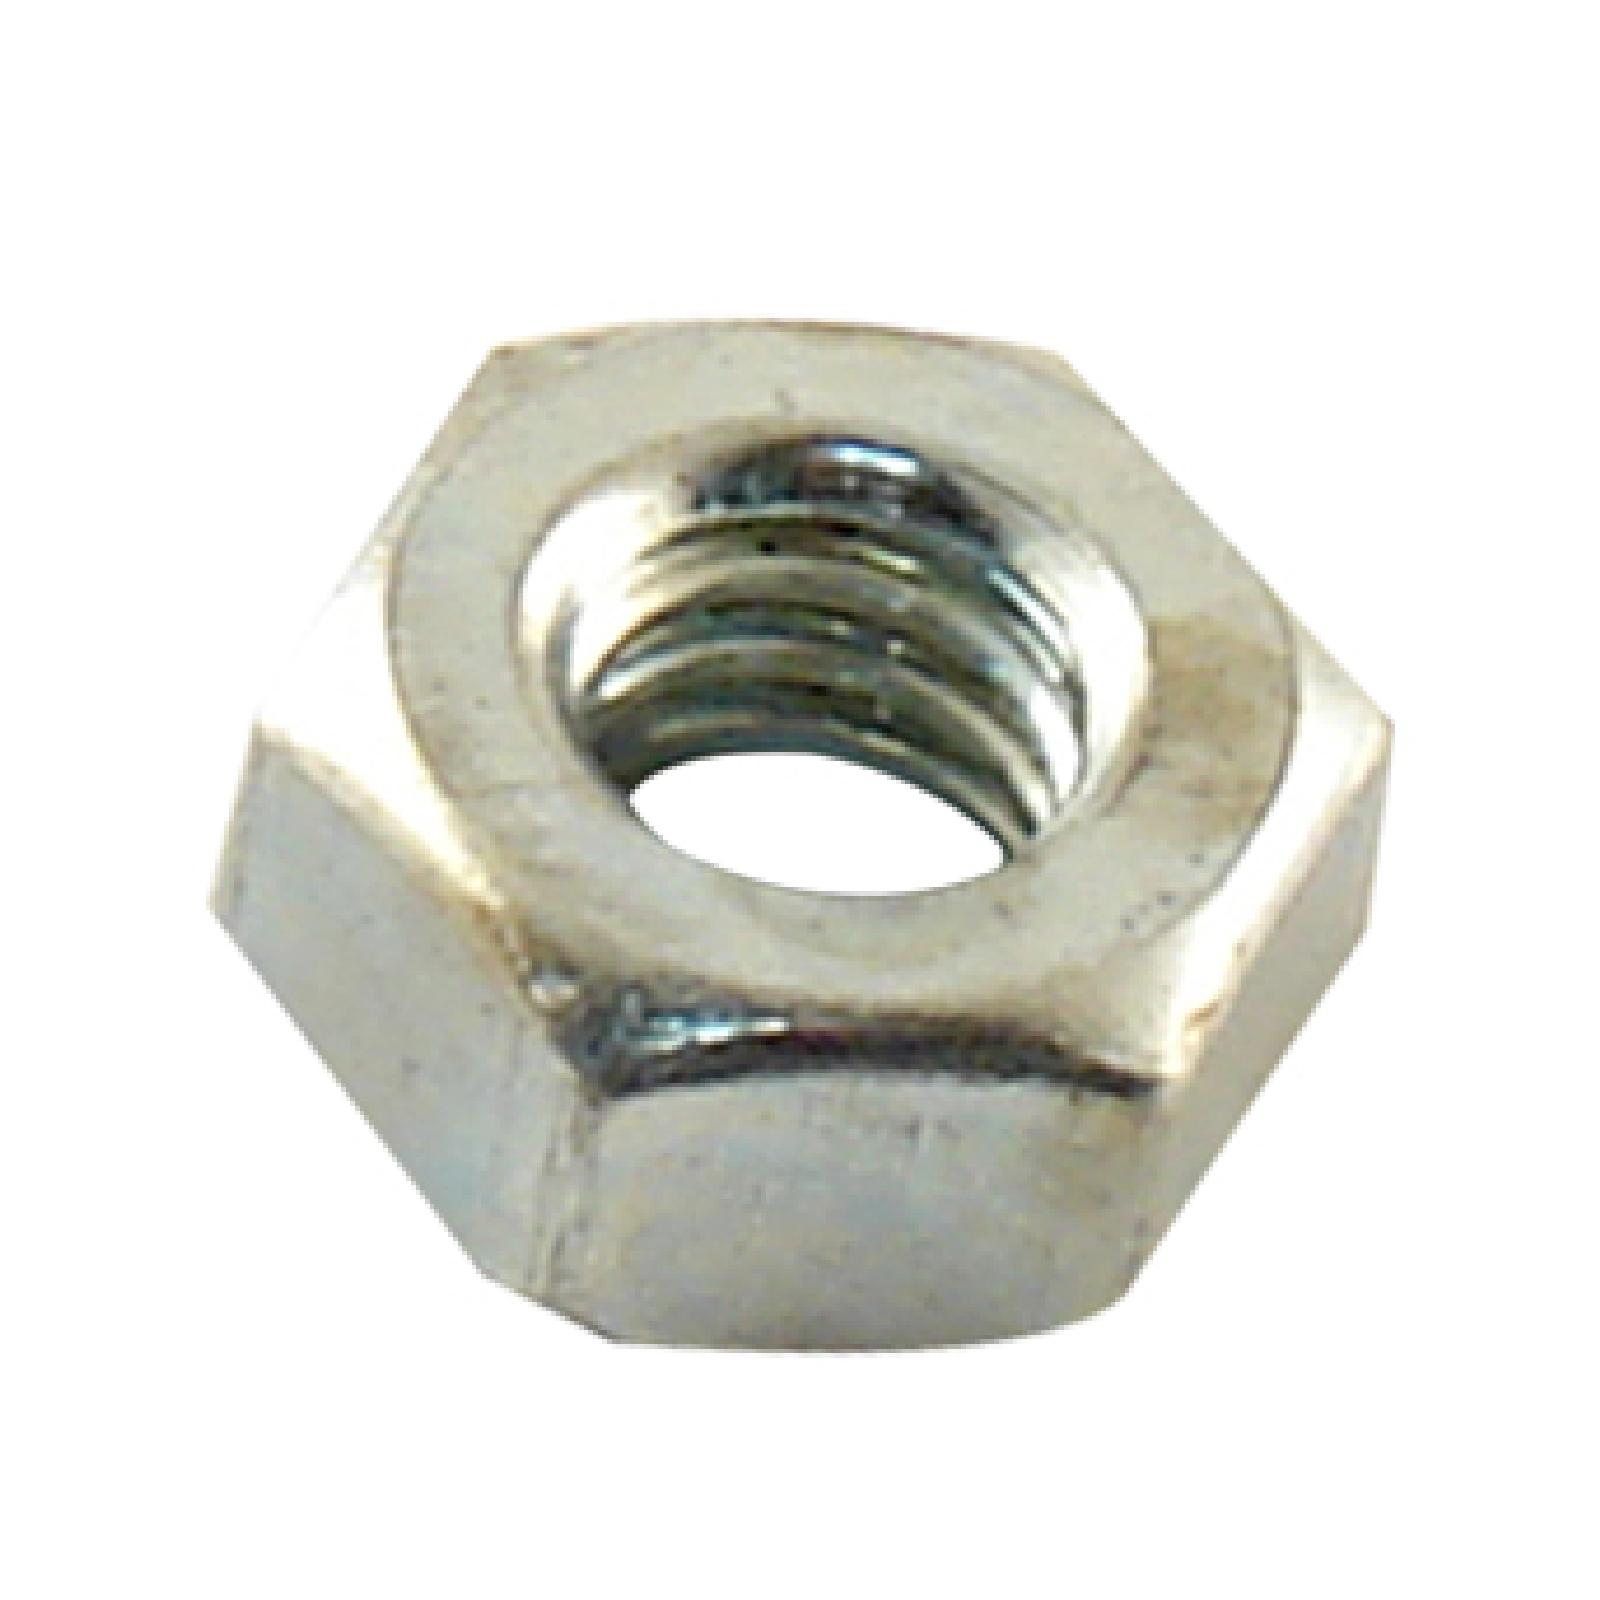 NUT HEX 1/4 20 GR part# 712-3006 by MTD - Click Image to Close